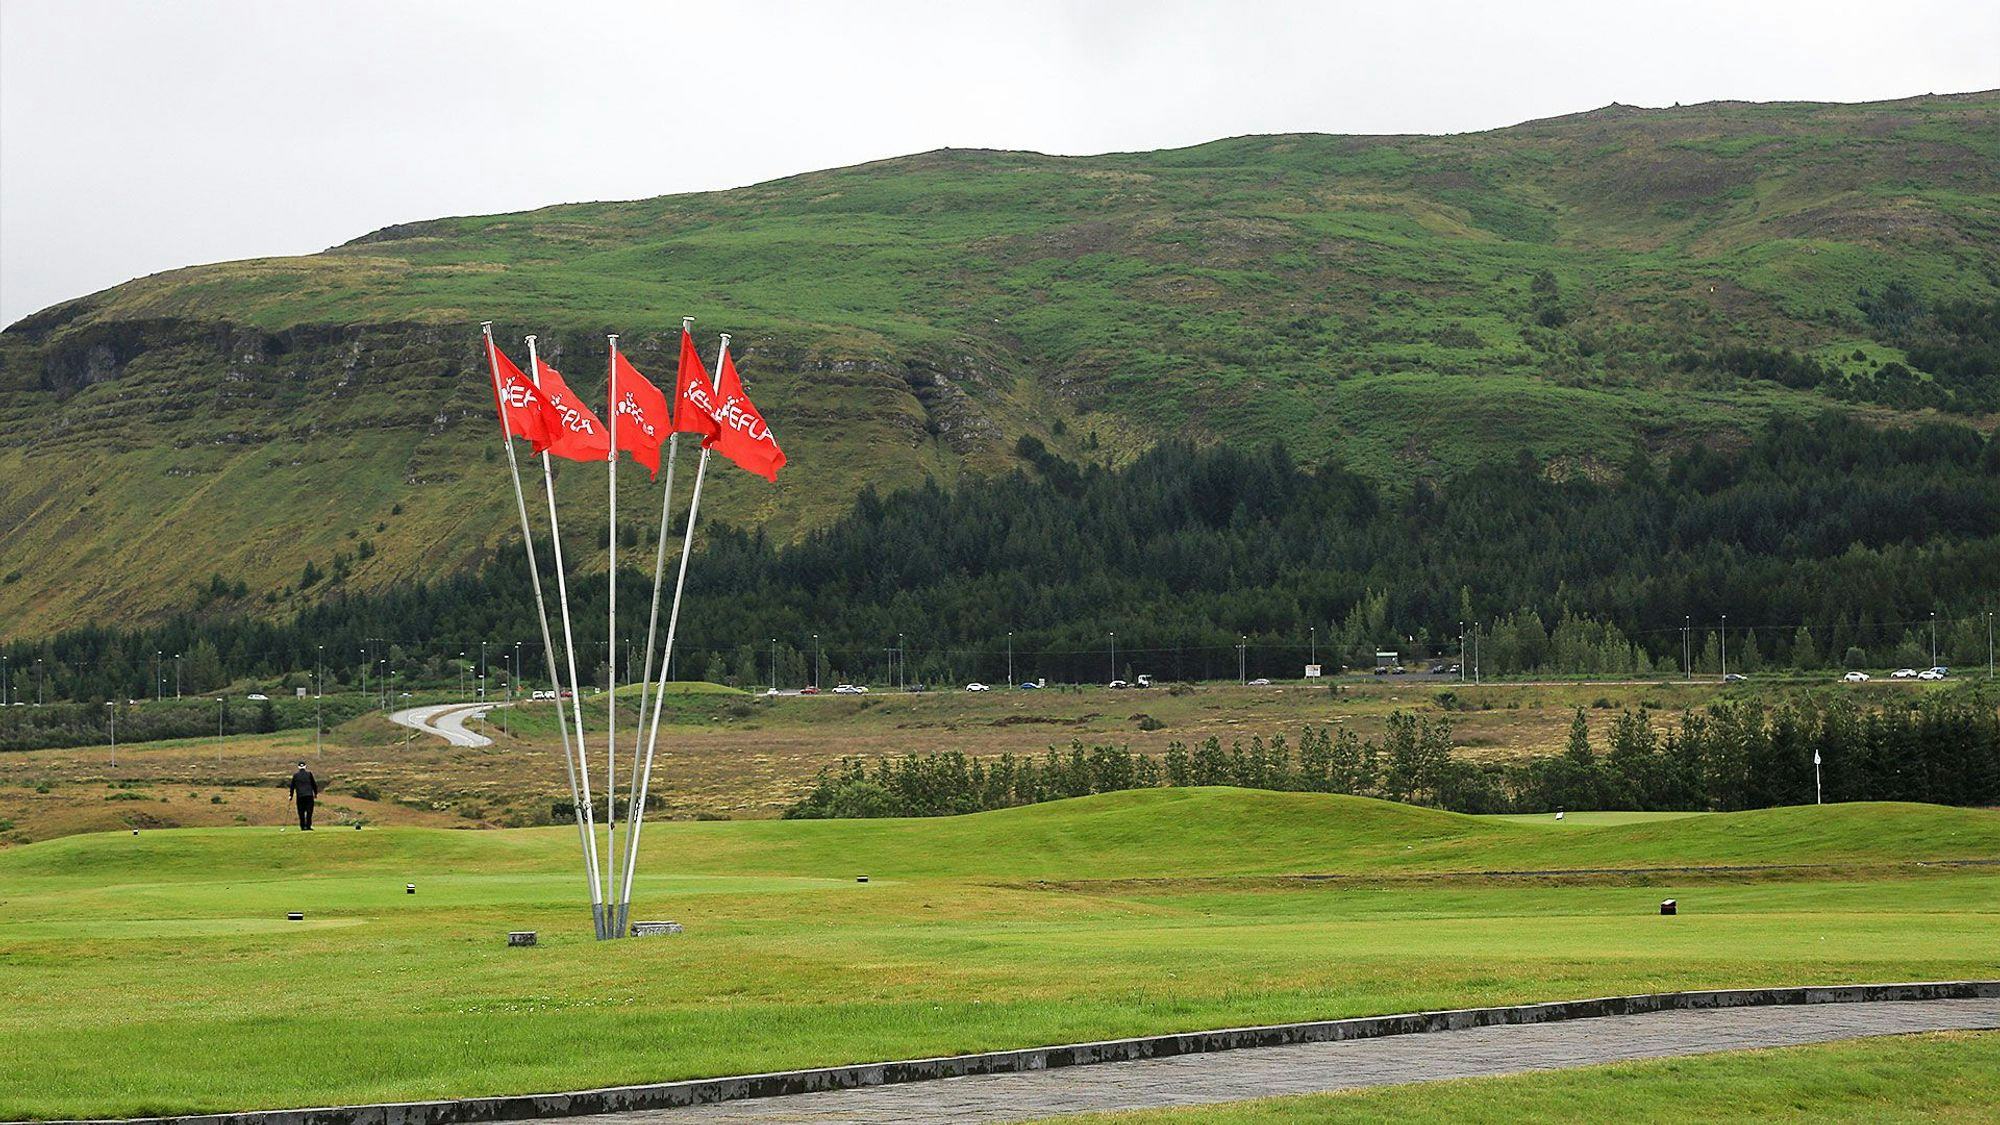 Few red flags fluttering in the middle of a golf course